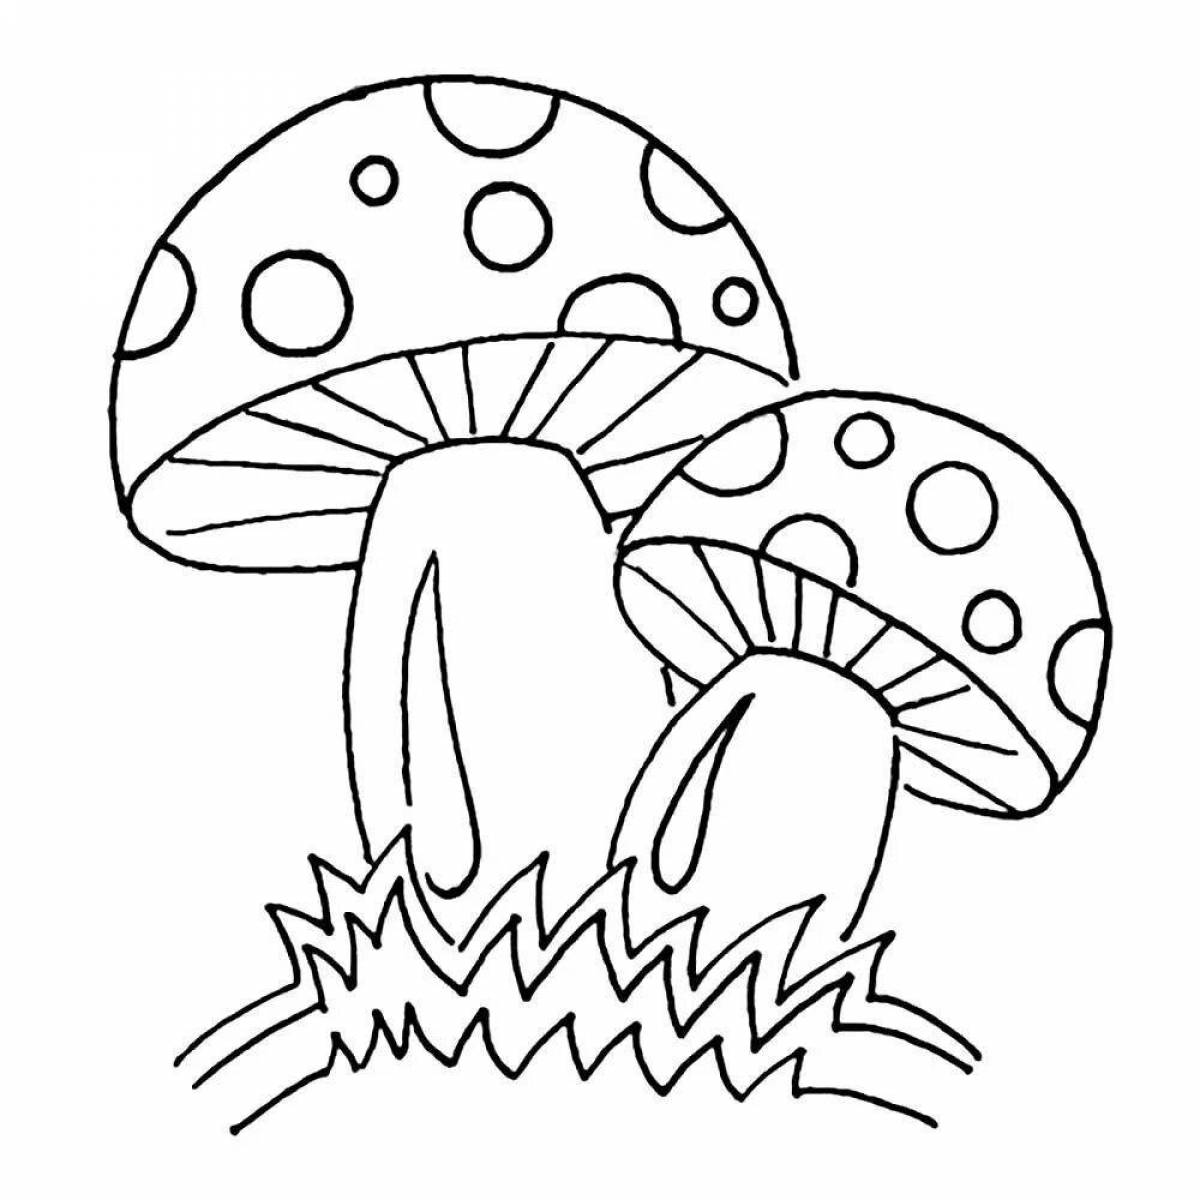 Adorable mushroom coloring book for 6-7 year olds